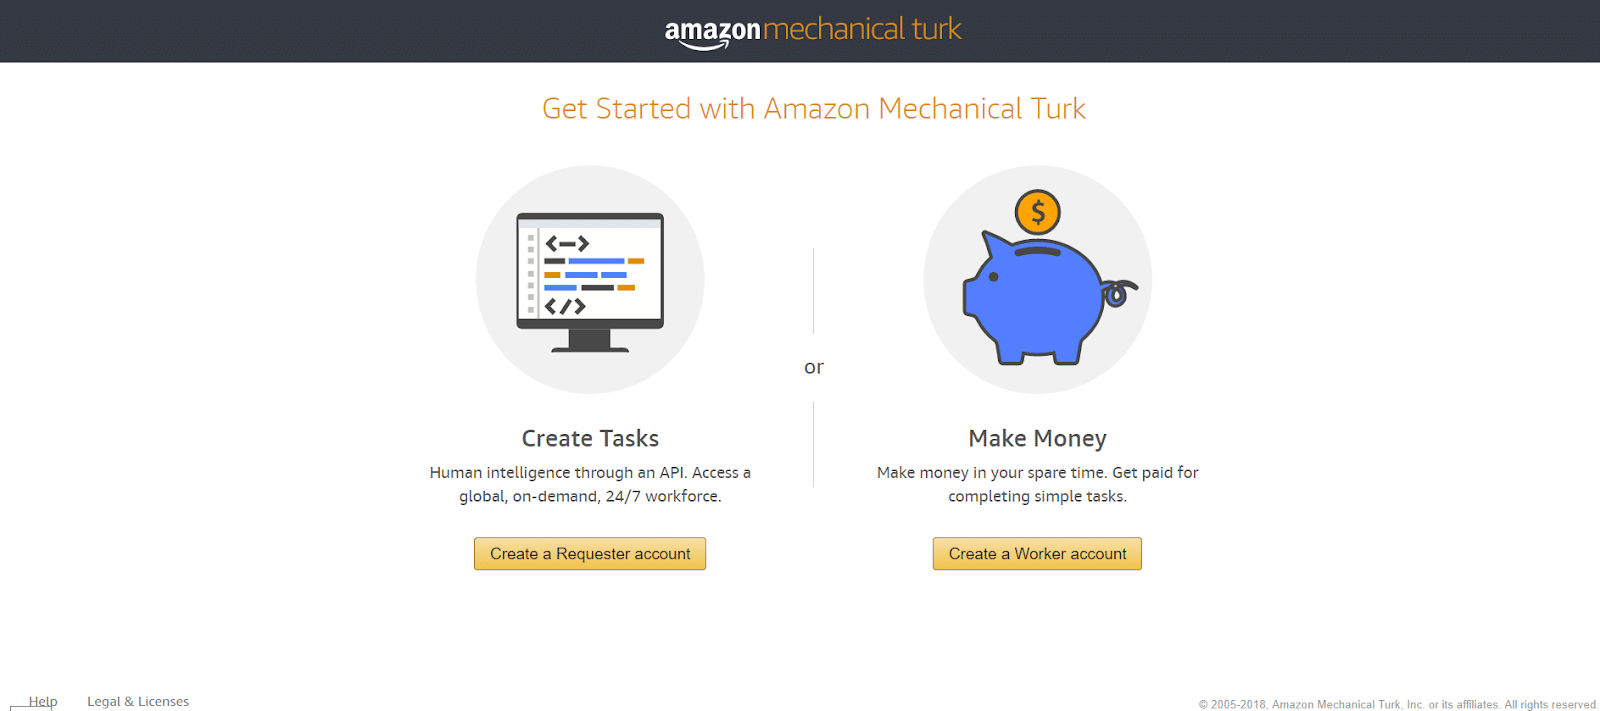 Amazon Mechanical Turk: the webpage to get started